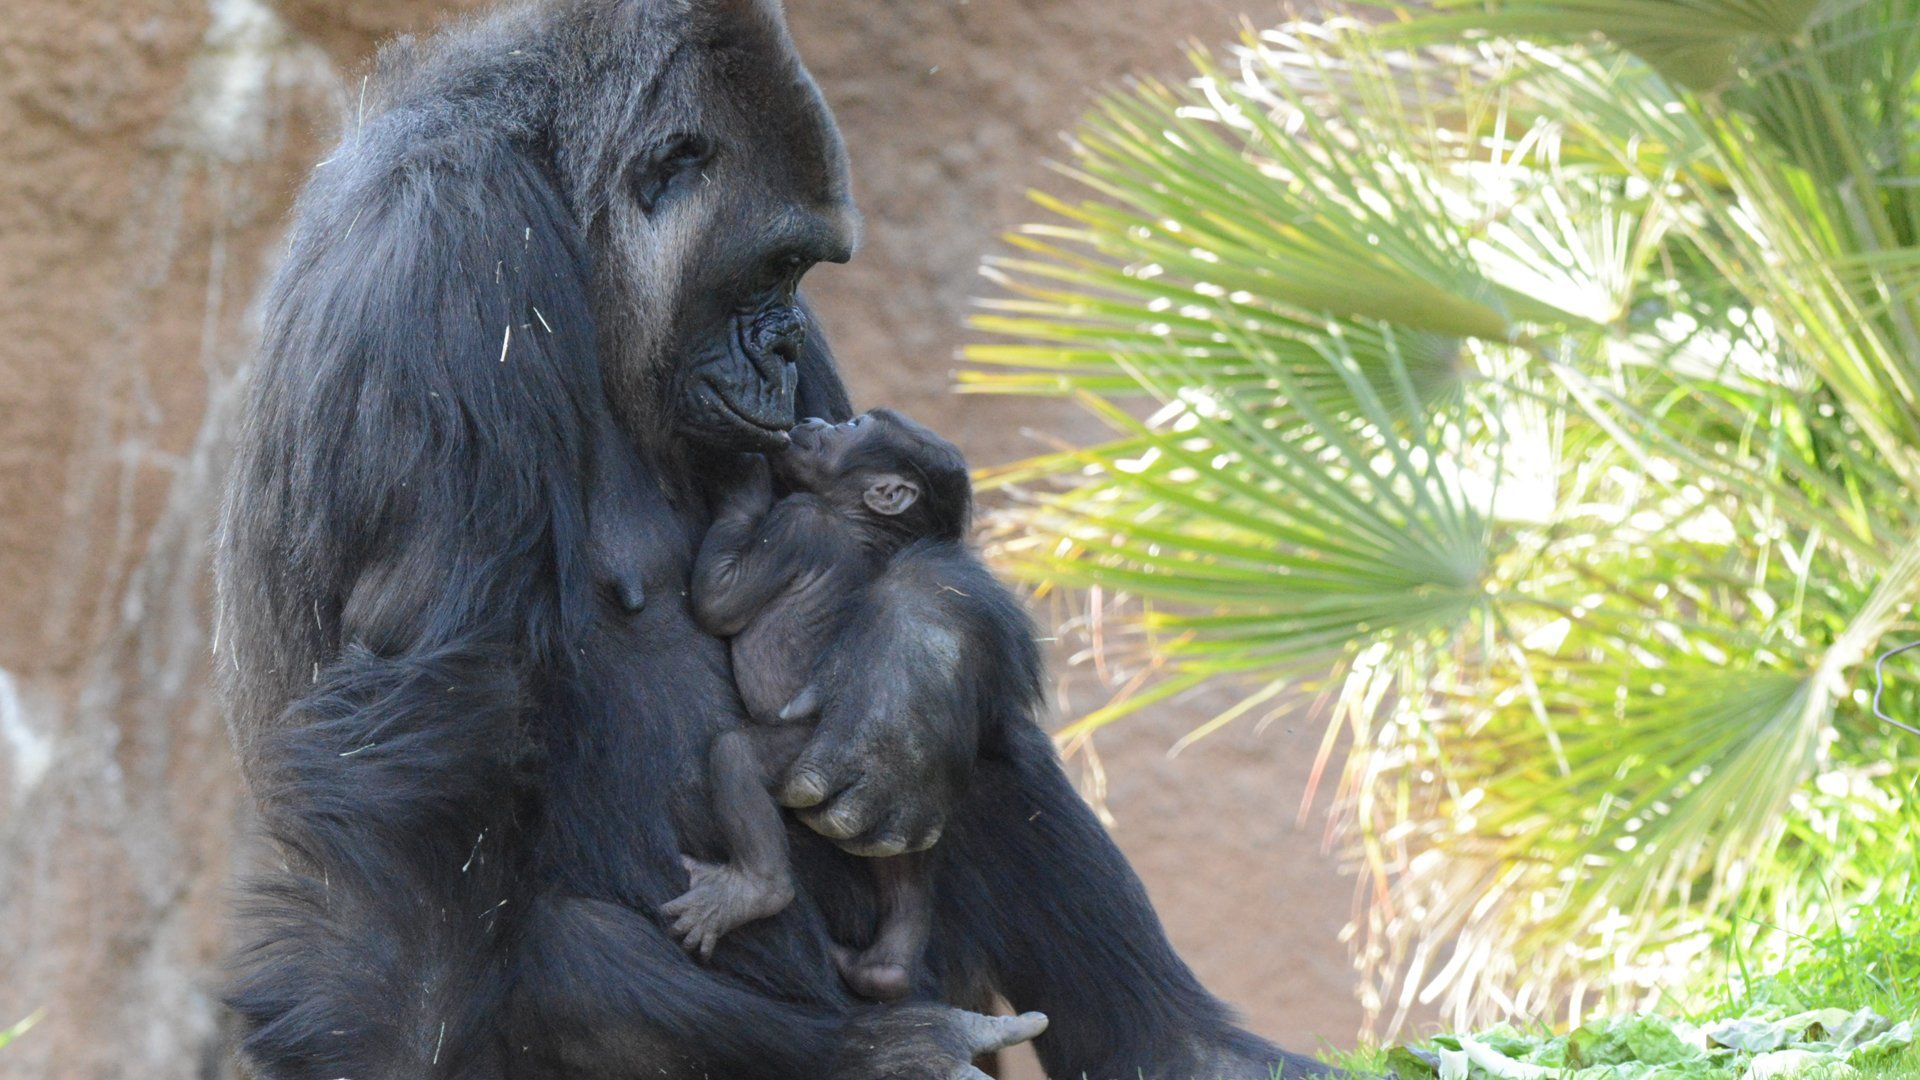 L.A. Zoo Announces Name of 1st Gorilla Born at Facility in Over 20